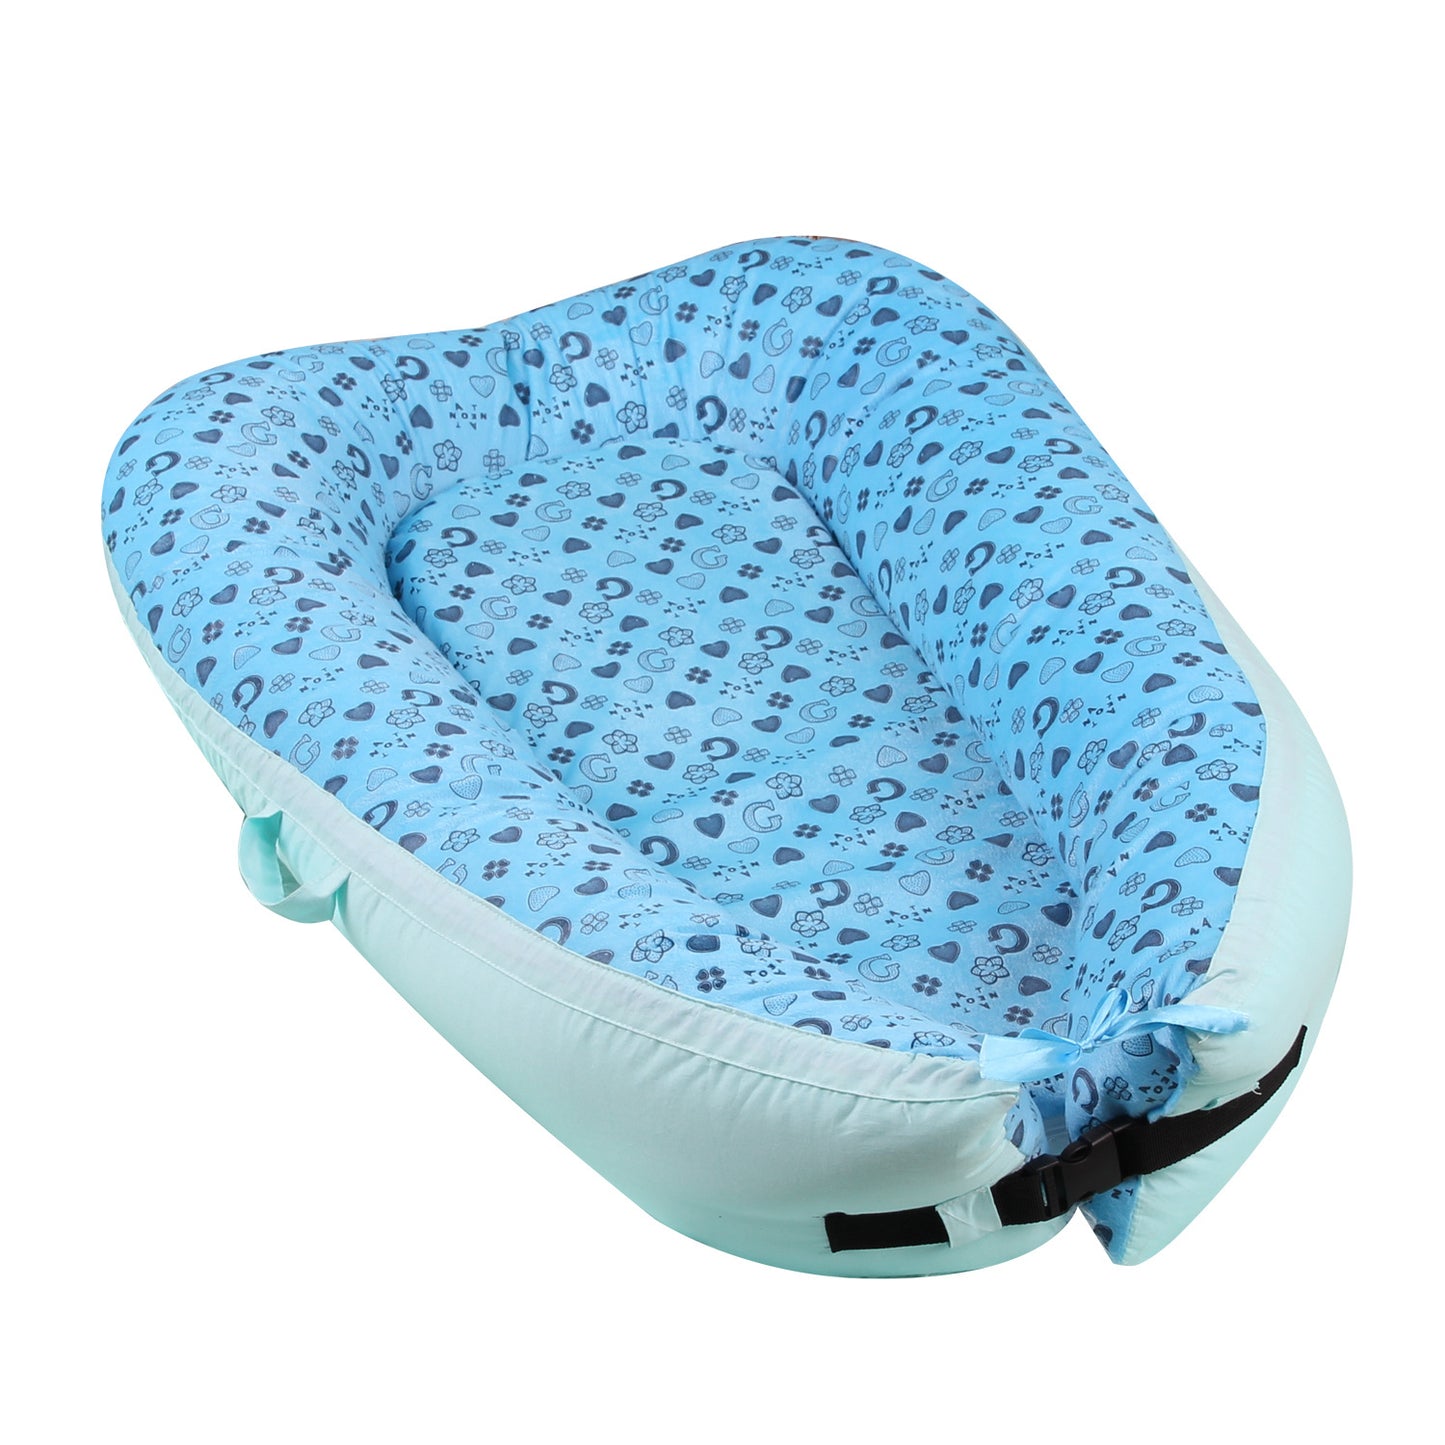 Portable Coax Baby Bed Cot Baby Uterine Bionic Bed Removable and Washable Newborn Bed